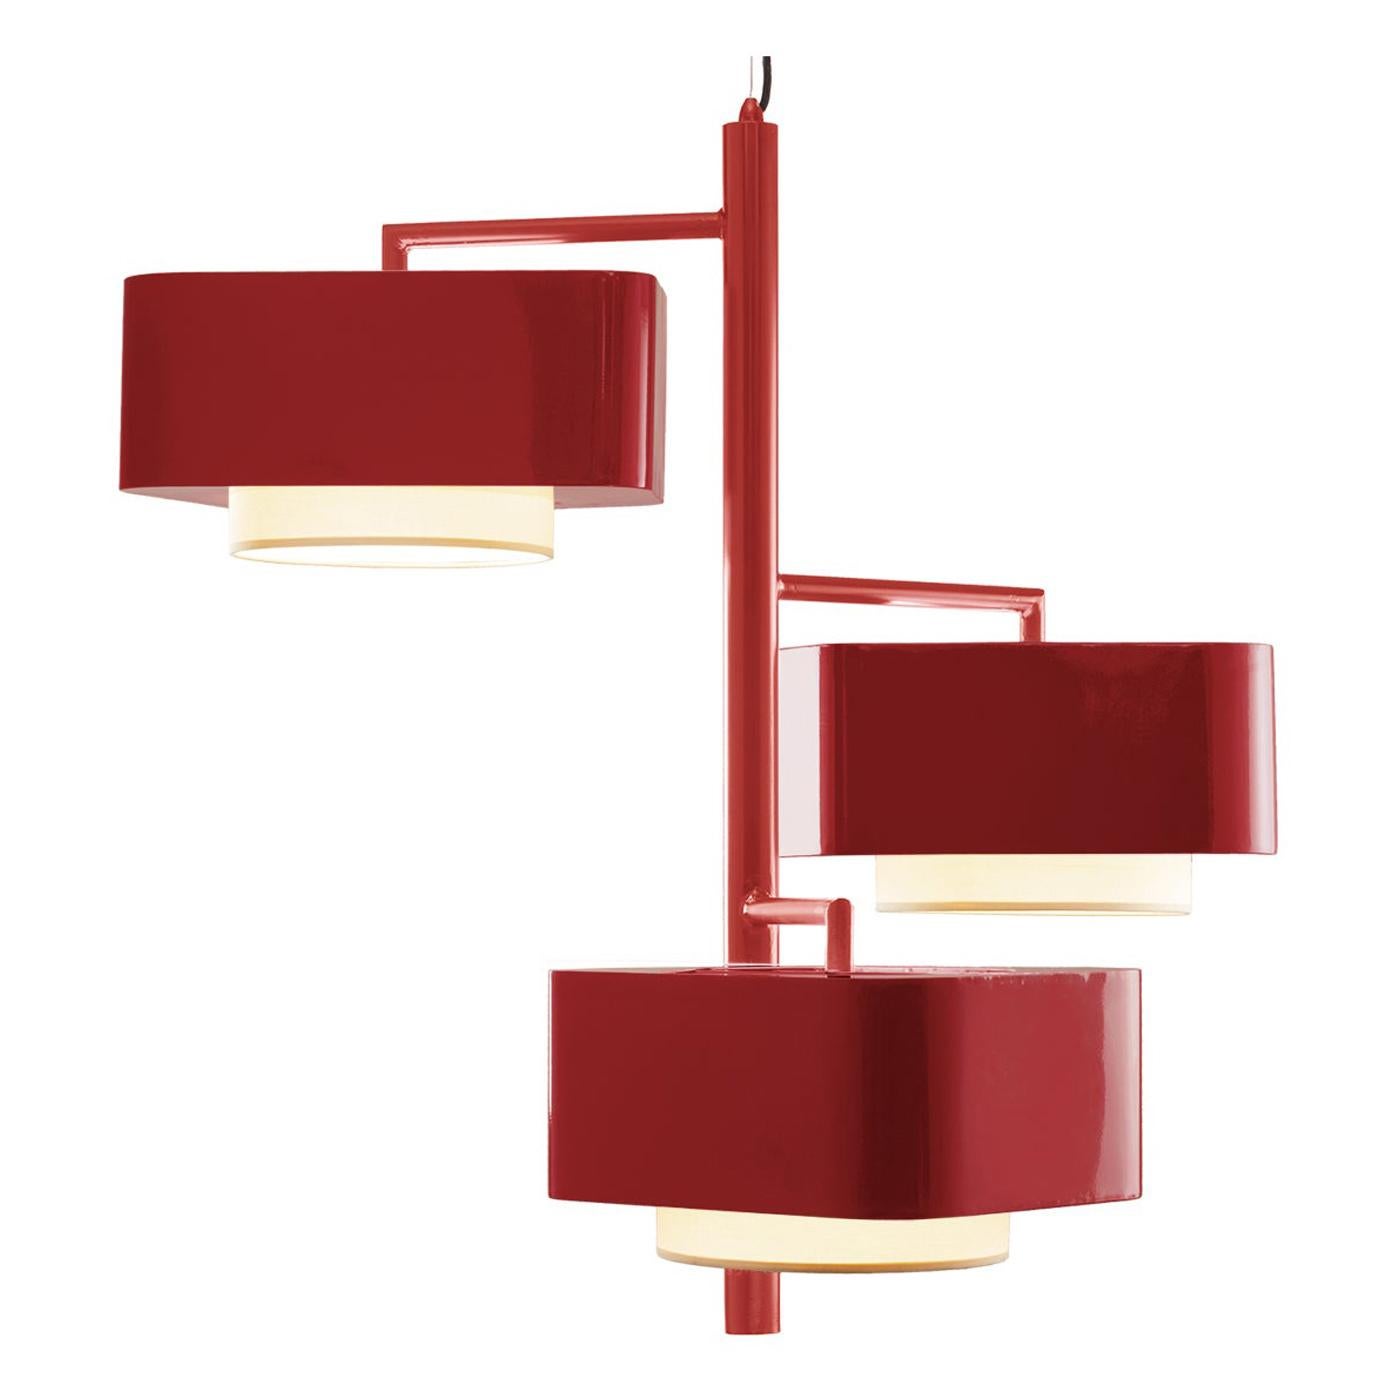 Contemporary Art Deco Inspired Carousel I Pendant Lamp in Lipstick Red For Sale